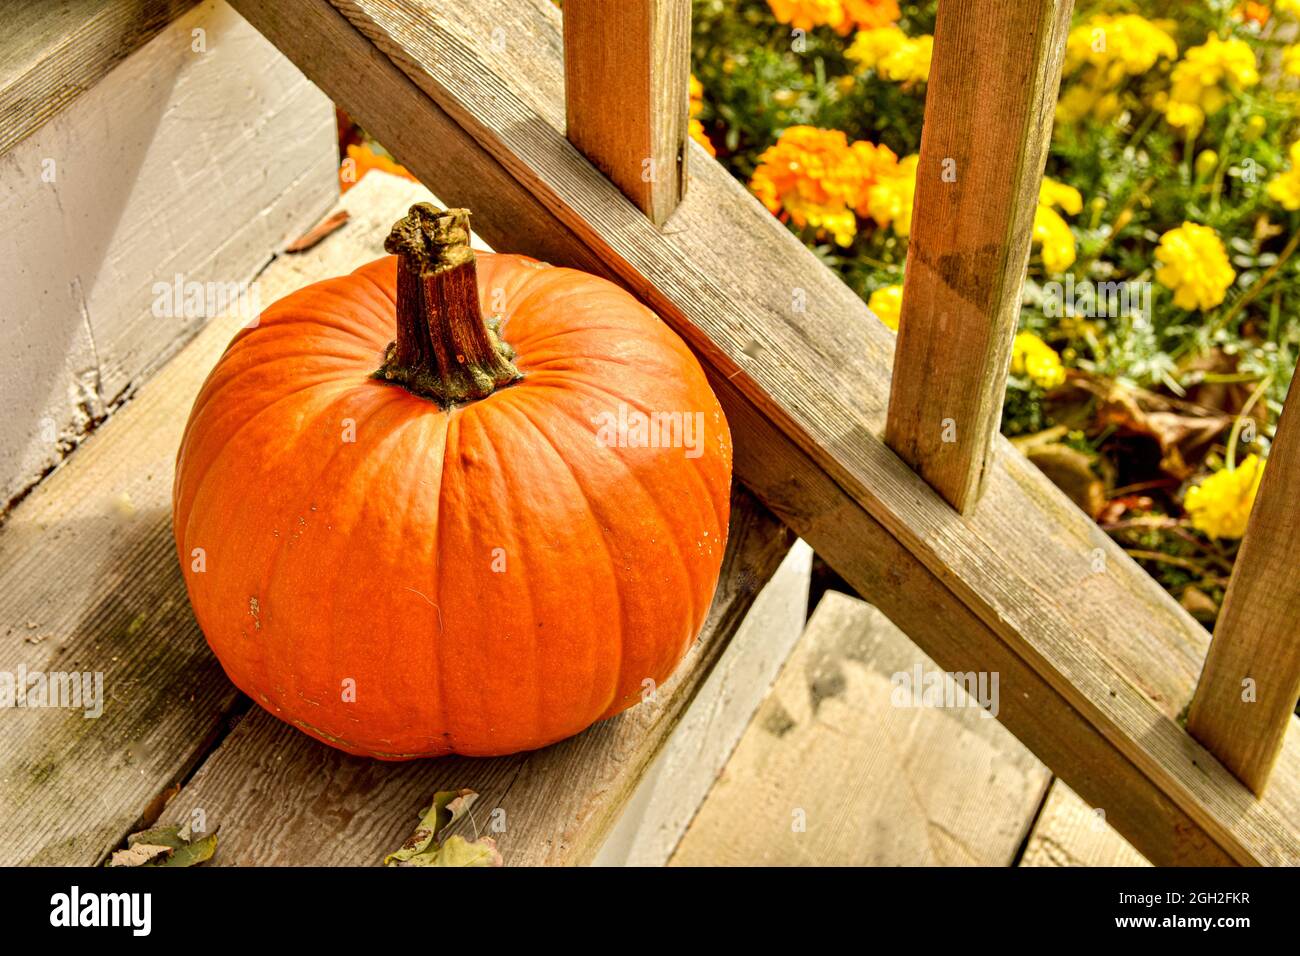 A bright orange pumpkin sits on wood stairs with the angles of the stair rail and spindles creating a sense of movement and visual interest. Stock Photo